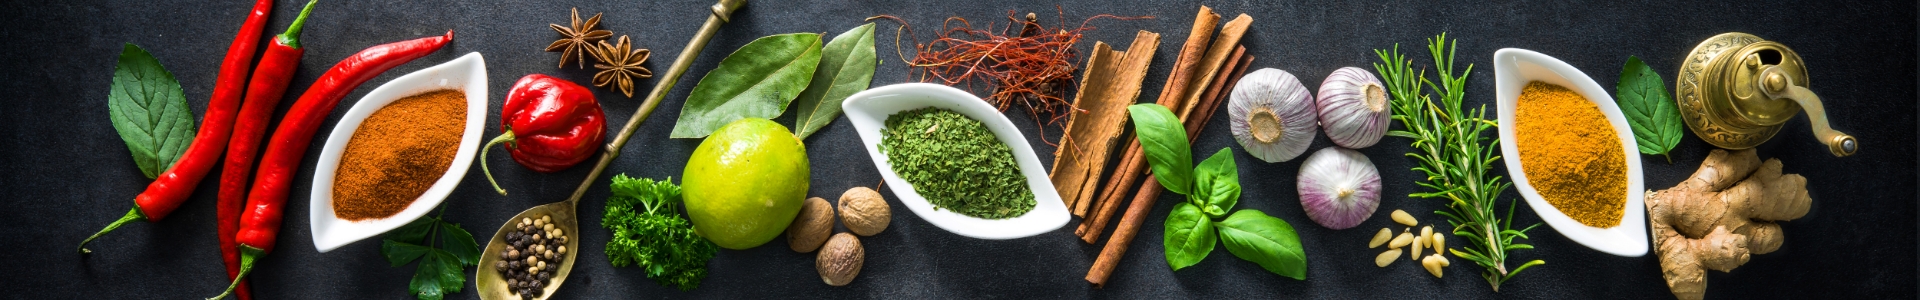 Herbs, Spices, Condiments & Related Products